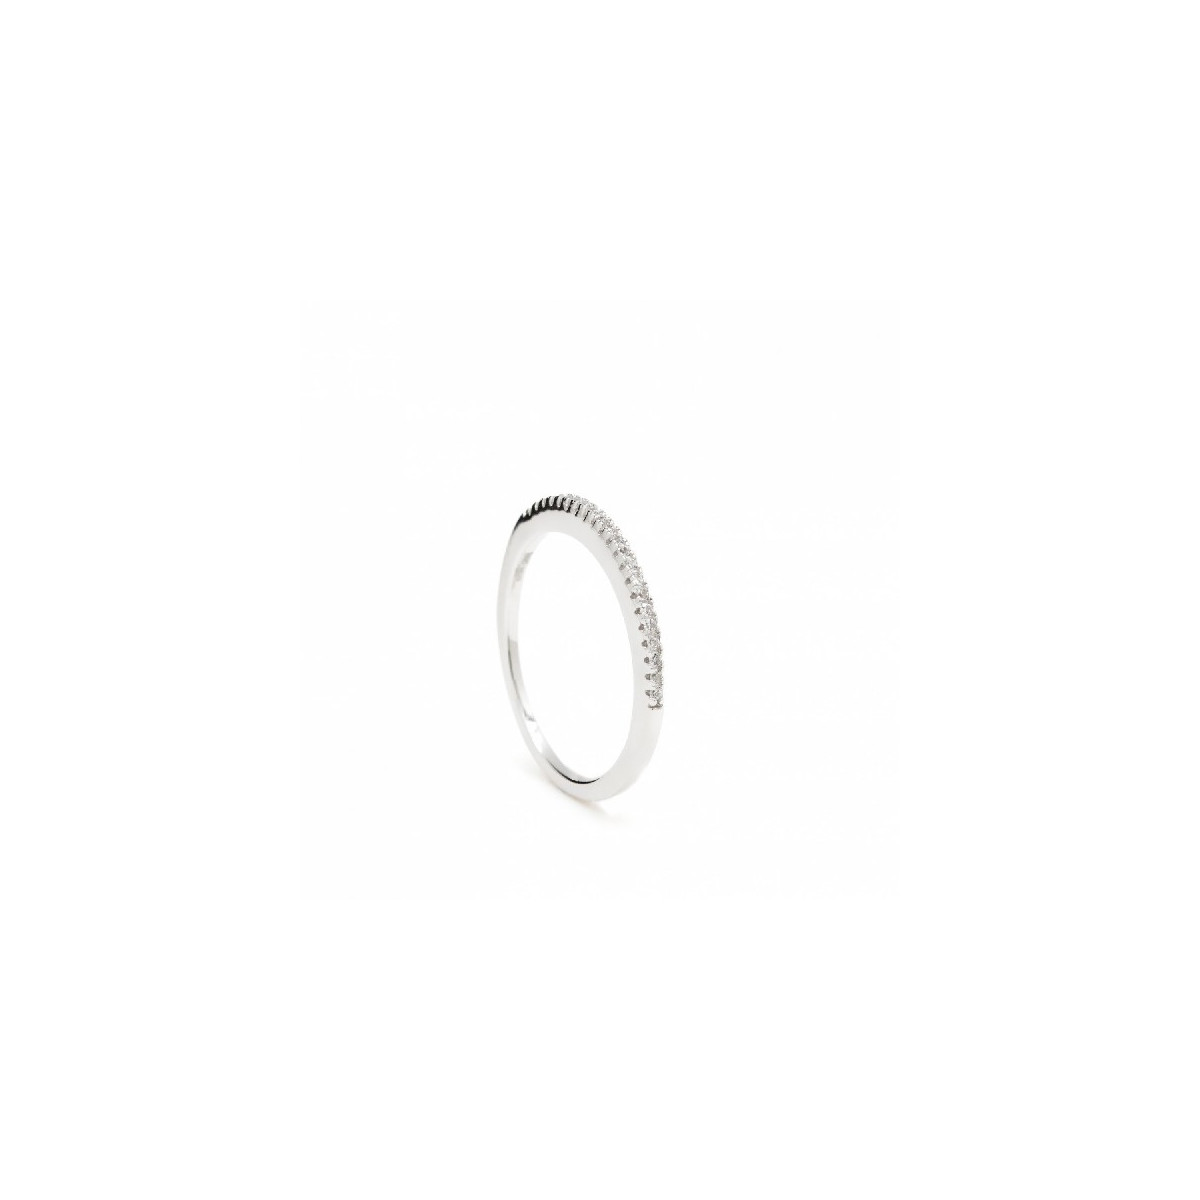 ANELL LINEARGENT - 16550-R